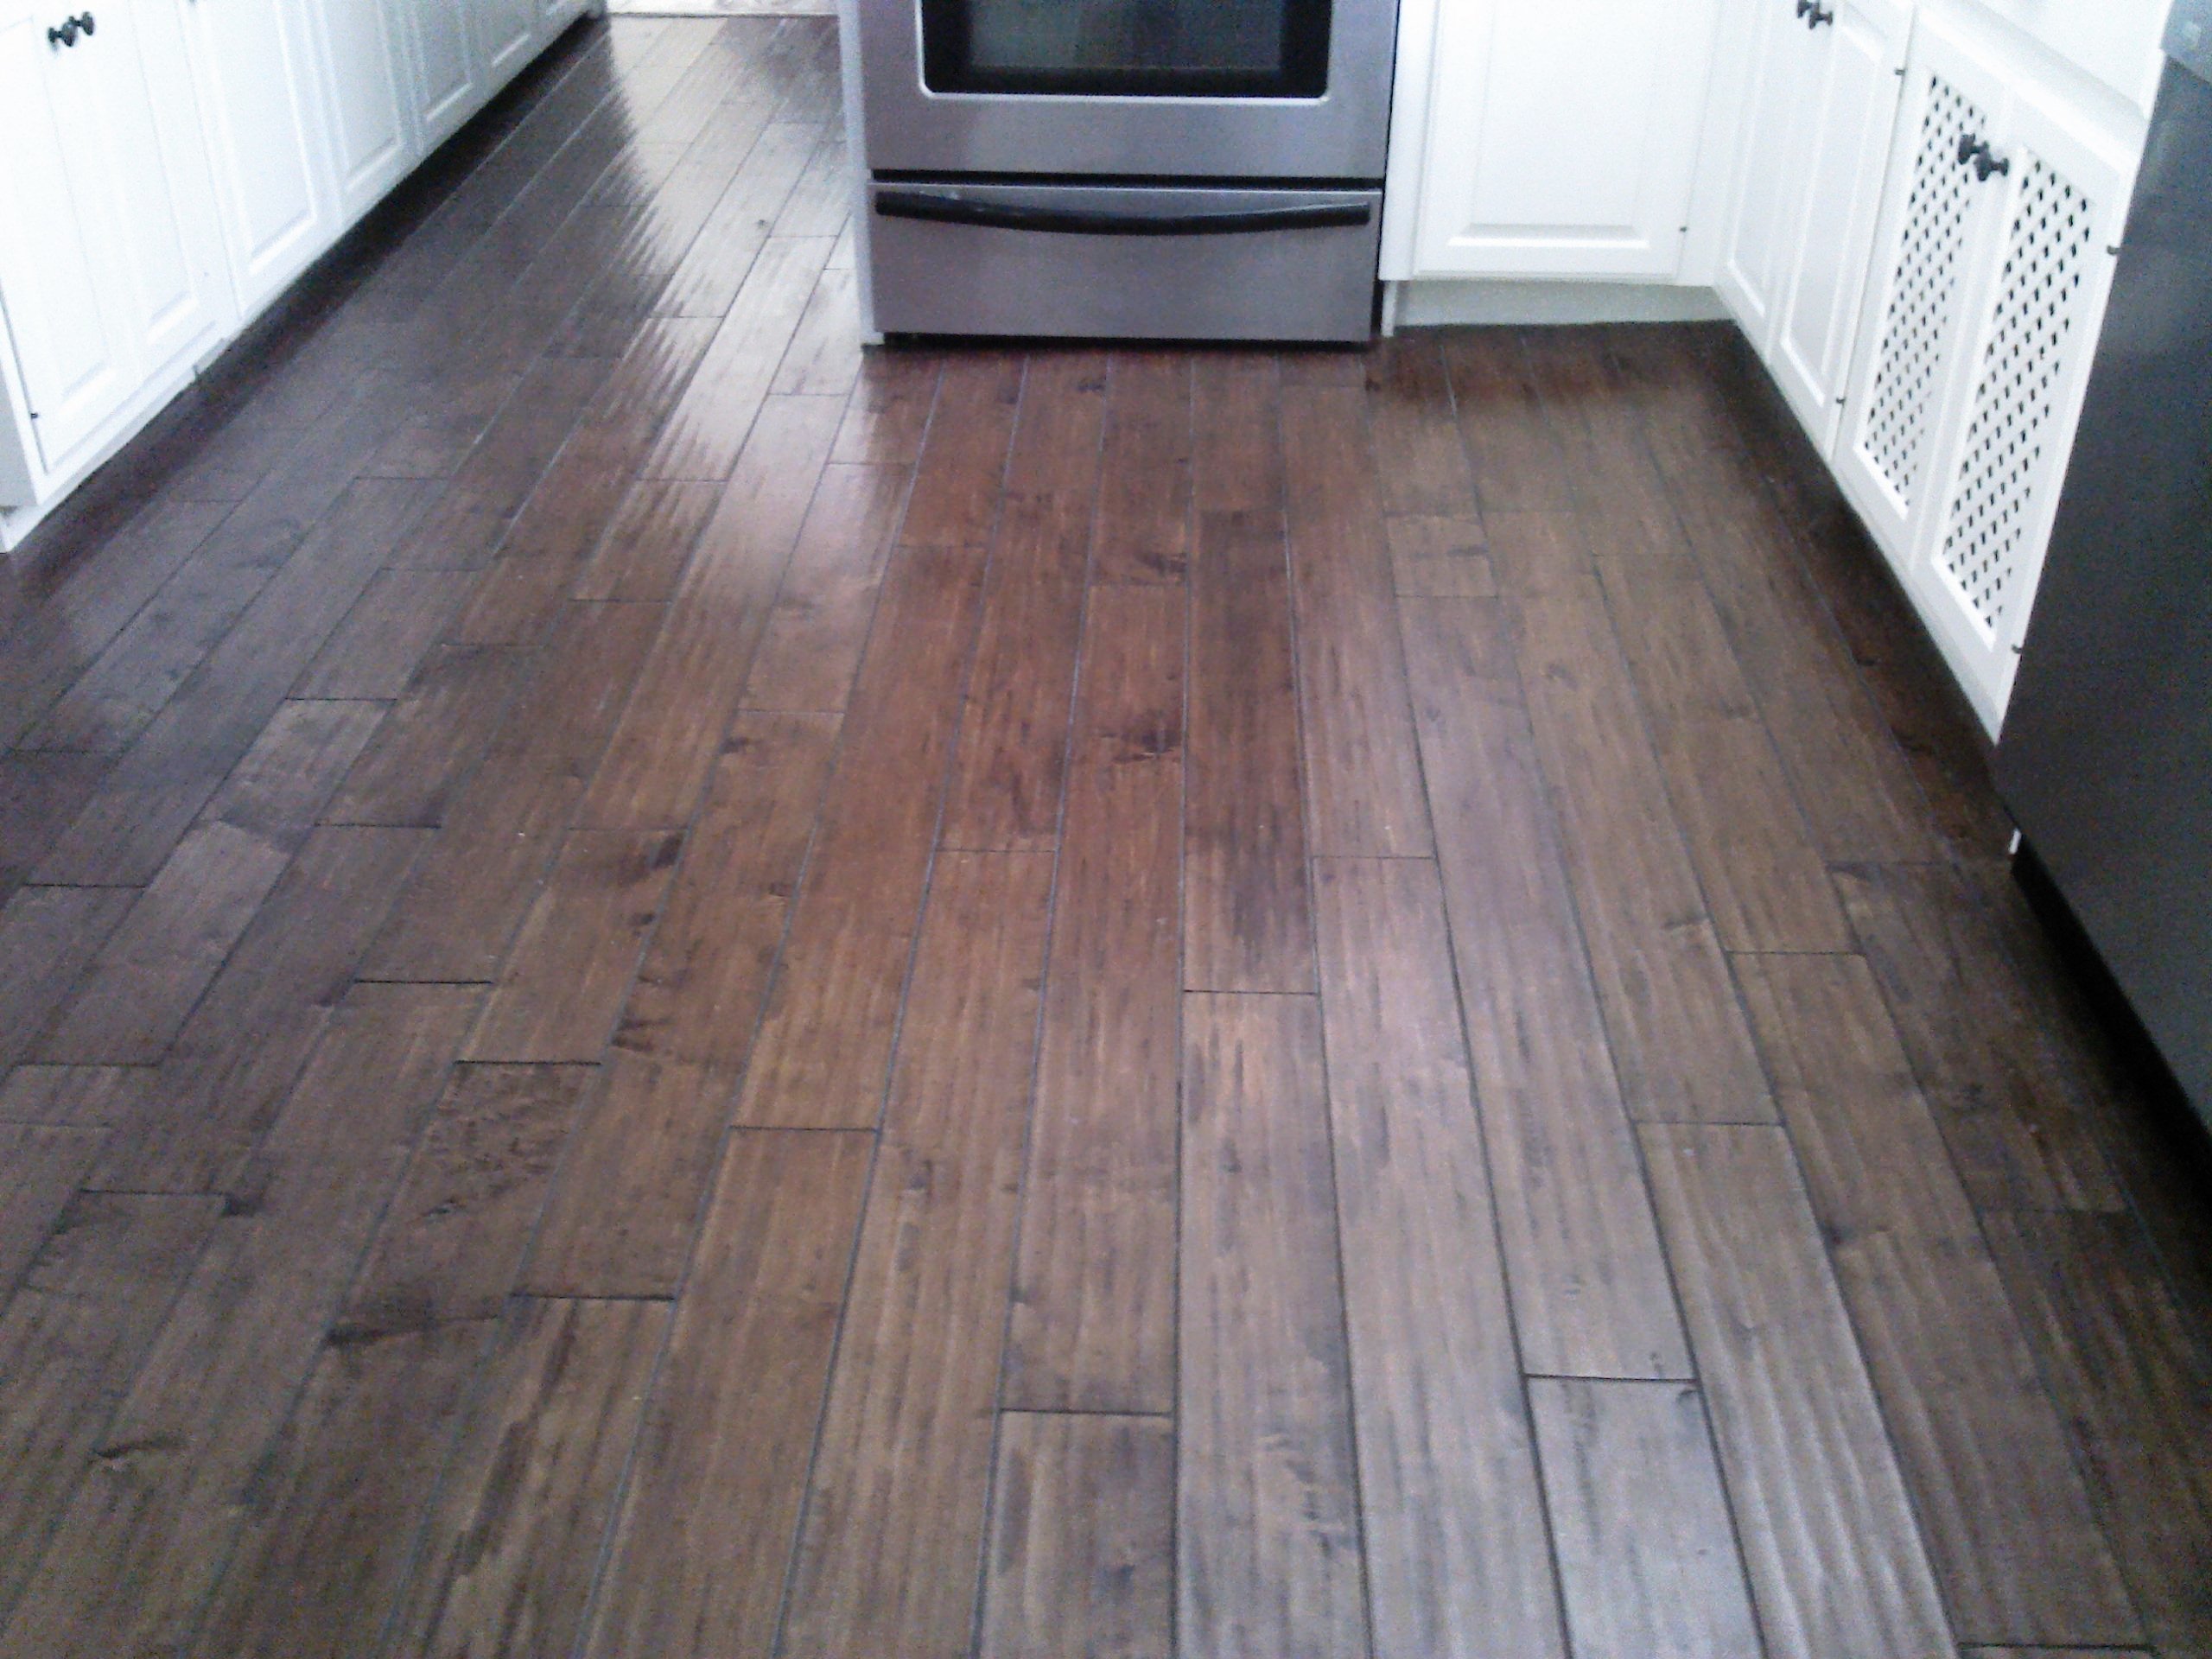 Laminate Wood Flooring In Kitchen, What To Look For In Laminate Wood Flooring